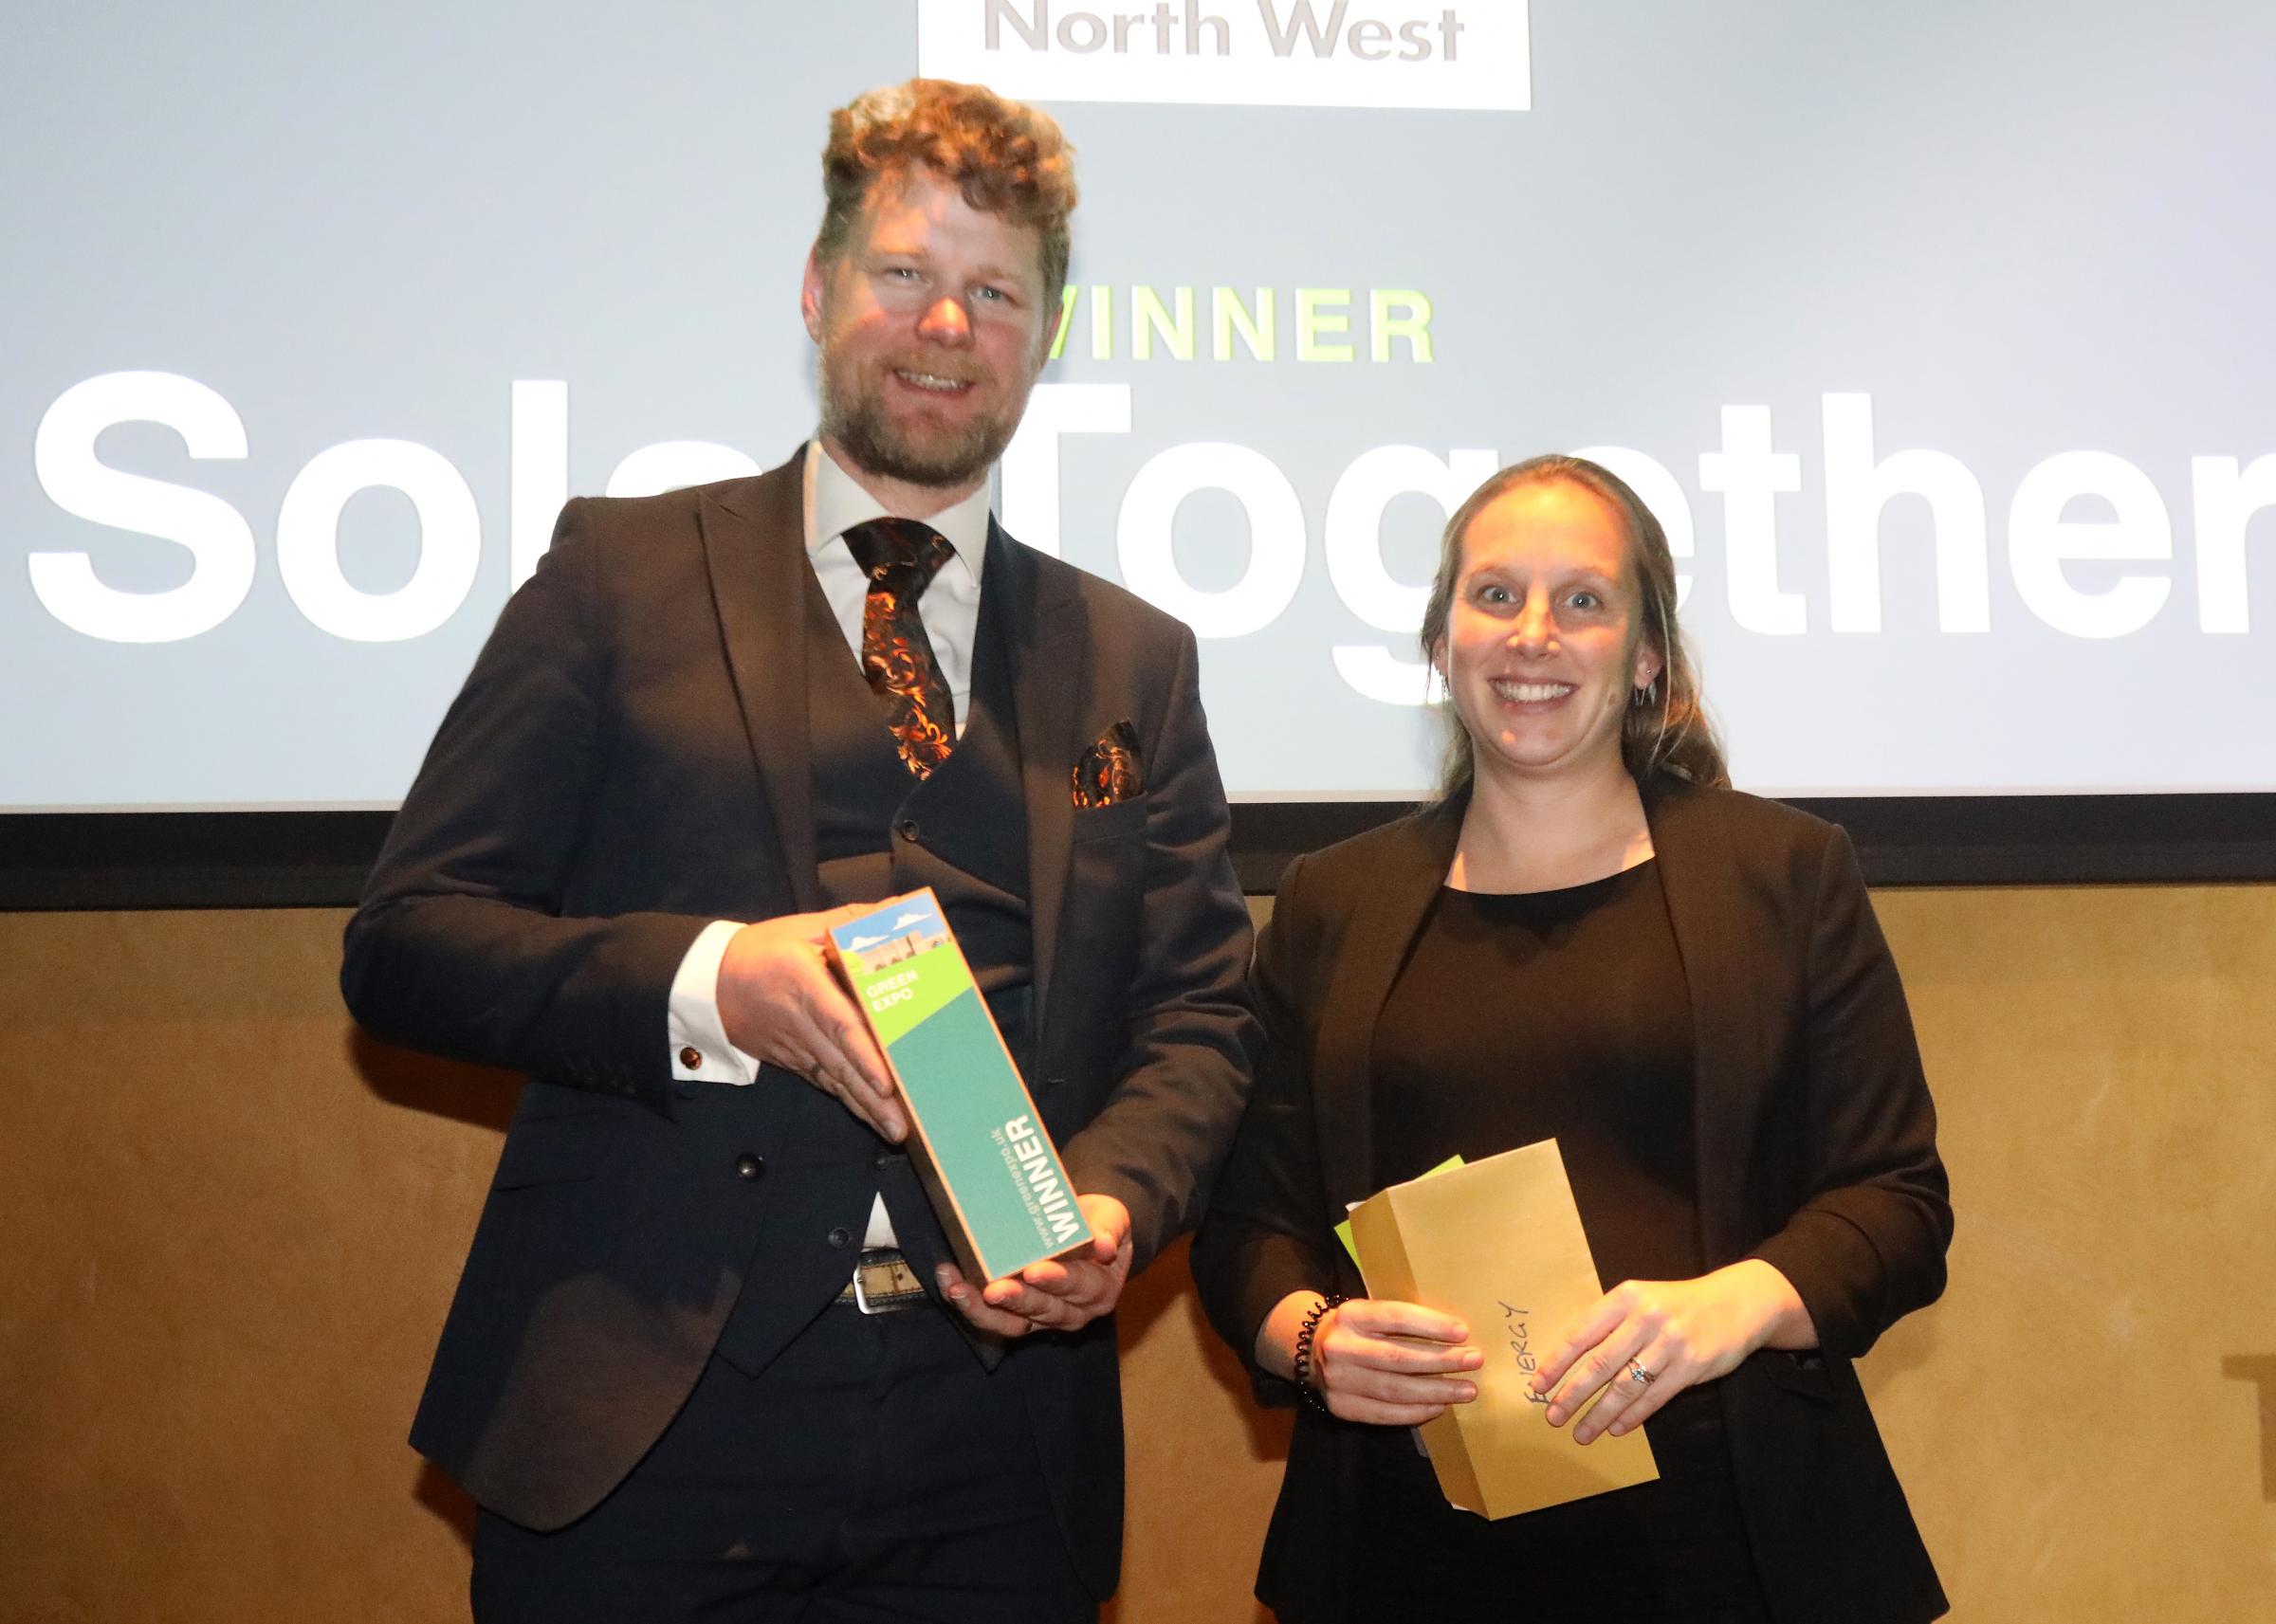 George Ablett, Energy Sector Specialist - Economy and Housing at CWaC received the award on behalf of Solar Together Cheshire and Warrington and Rachel Sutton, HyNet Project Manager at Progressive Energy. Photo by Ian Cooper/Ian Cooper Photography.